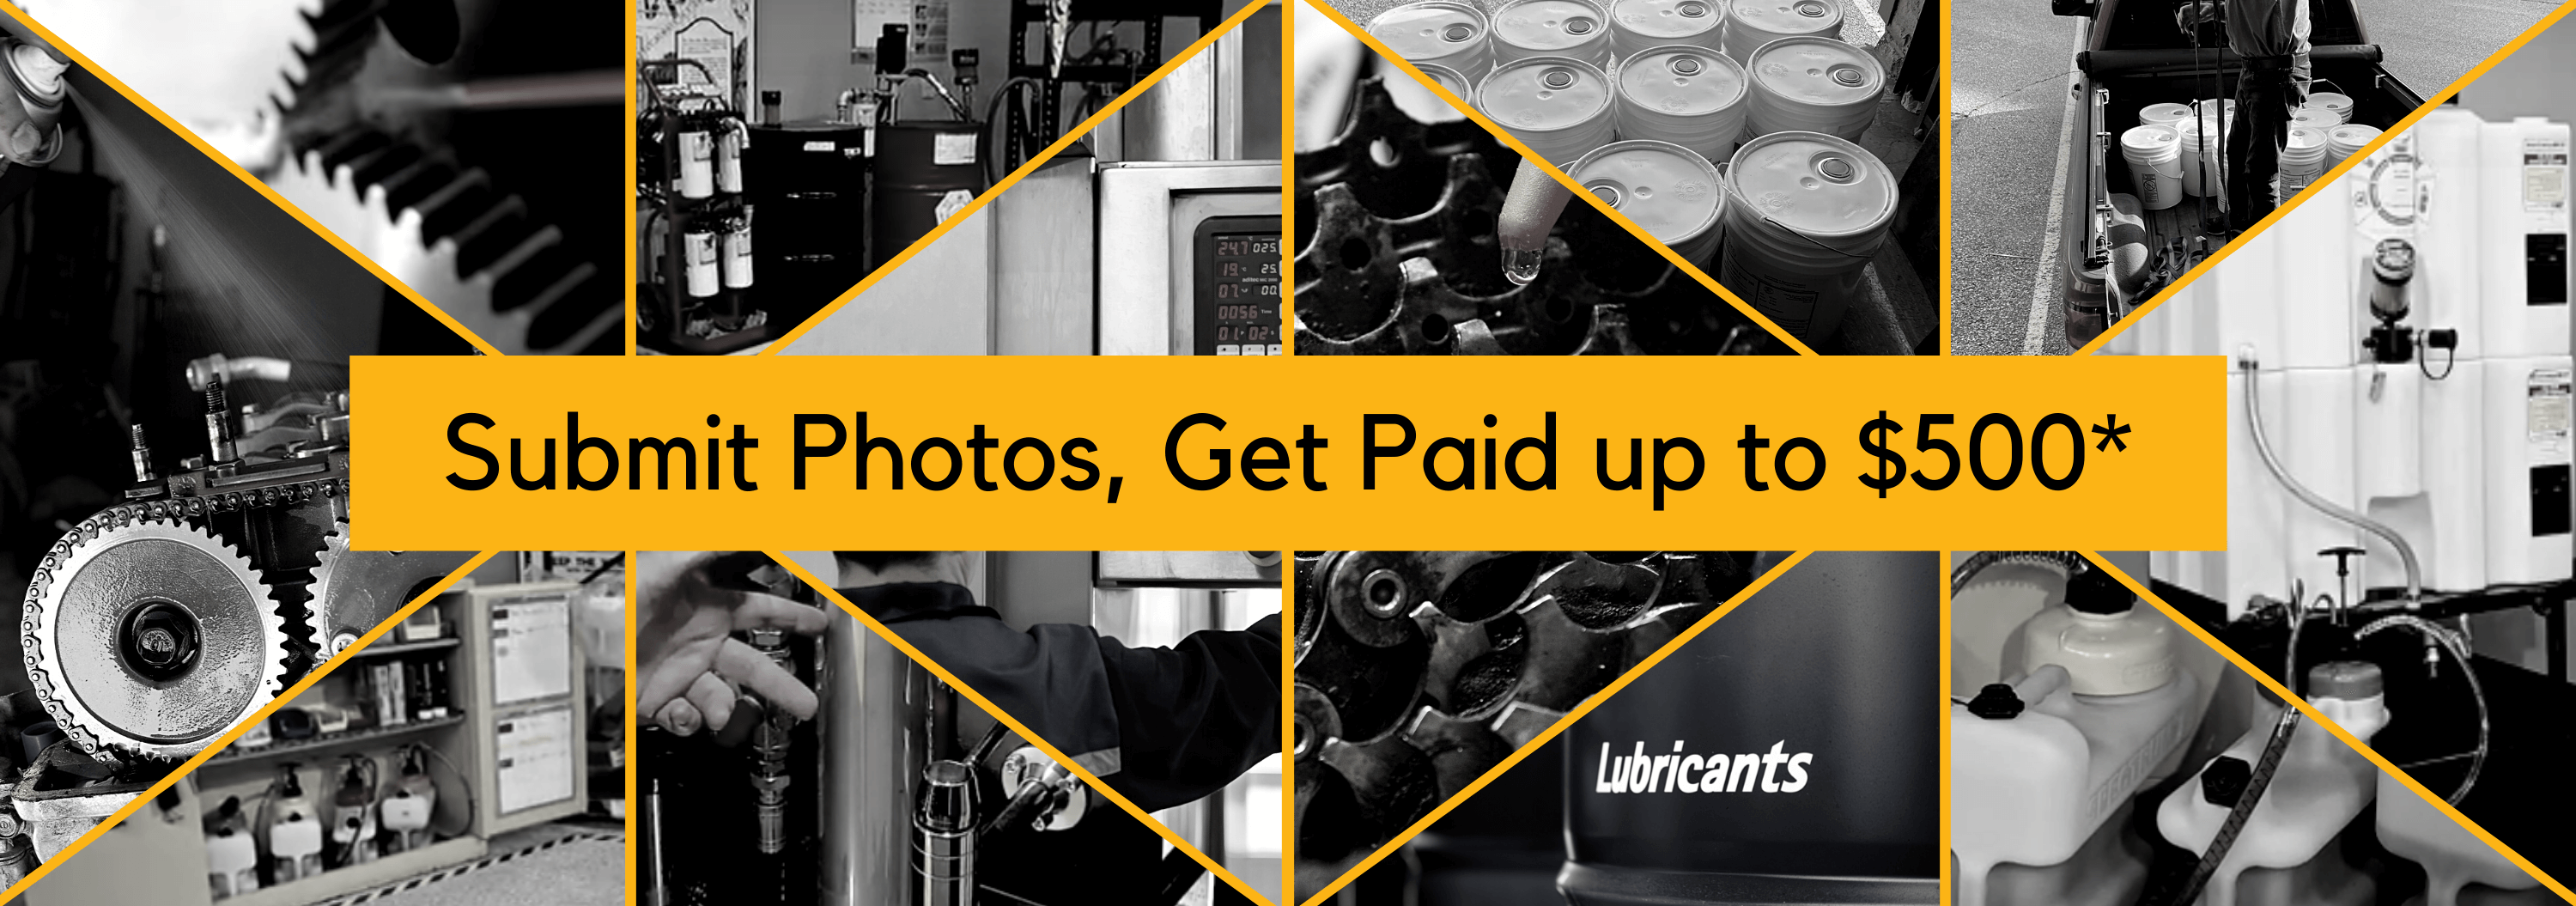 Get paid for your food processing industry and food grade lubricant photos! Chain Guard Food Grade Lubricants will pay you up to $500* for your industry-related photos and videos. Learn more about our photo and video buying program below.